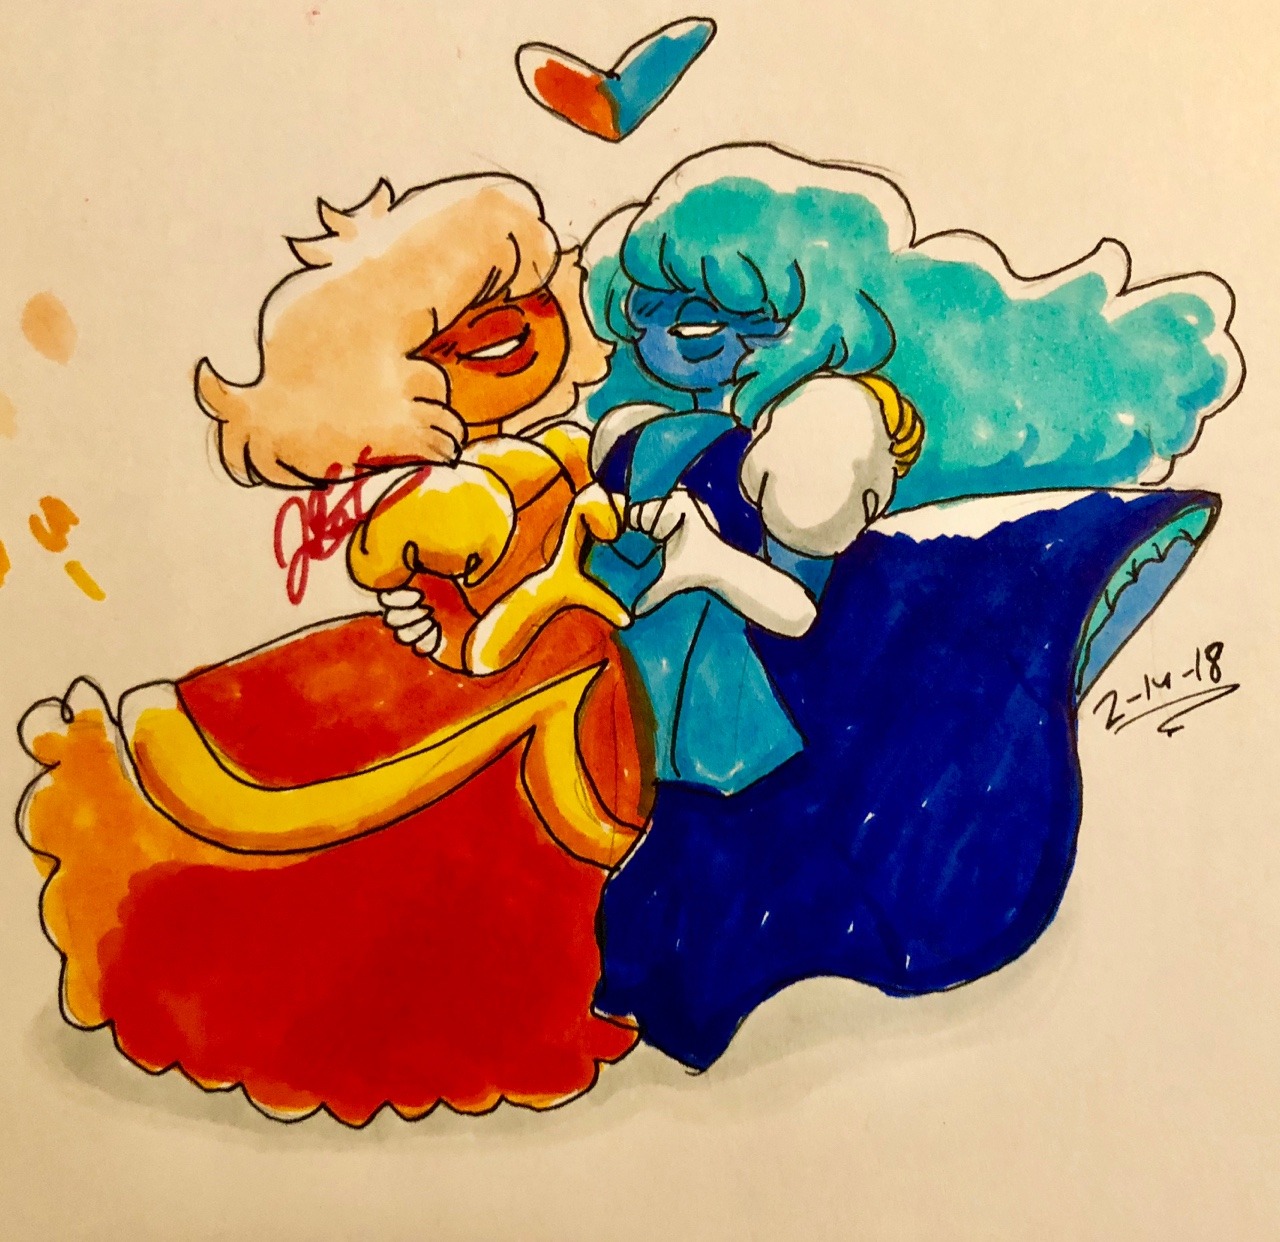 Finished padparadscha and sapphire! Happy Valentine’s Day everyone!